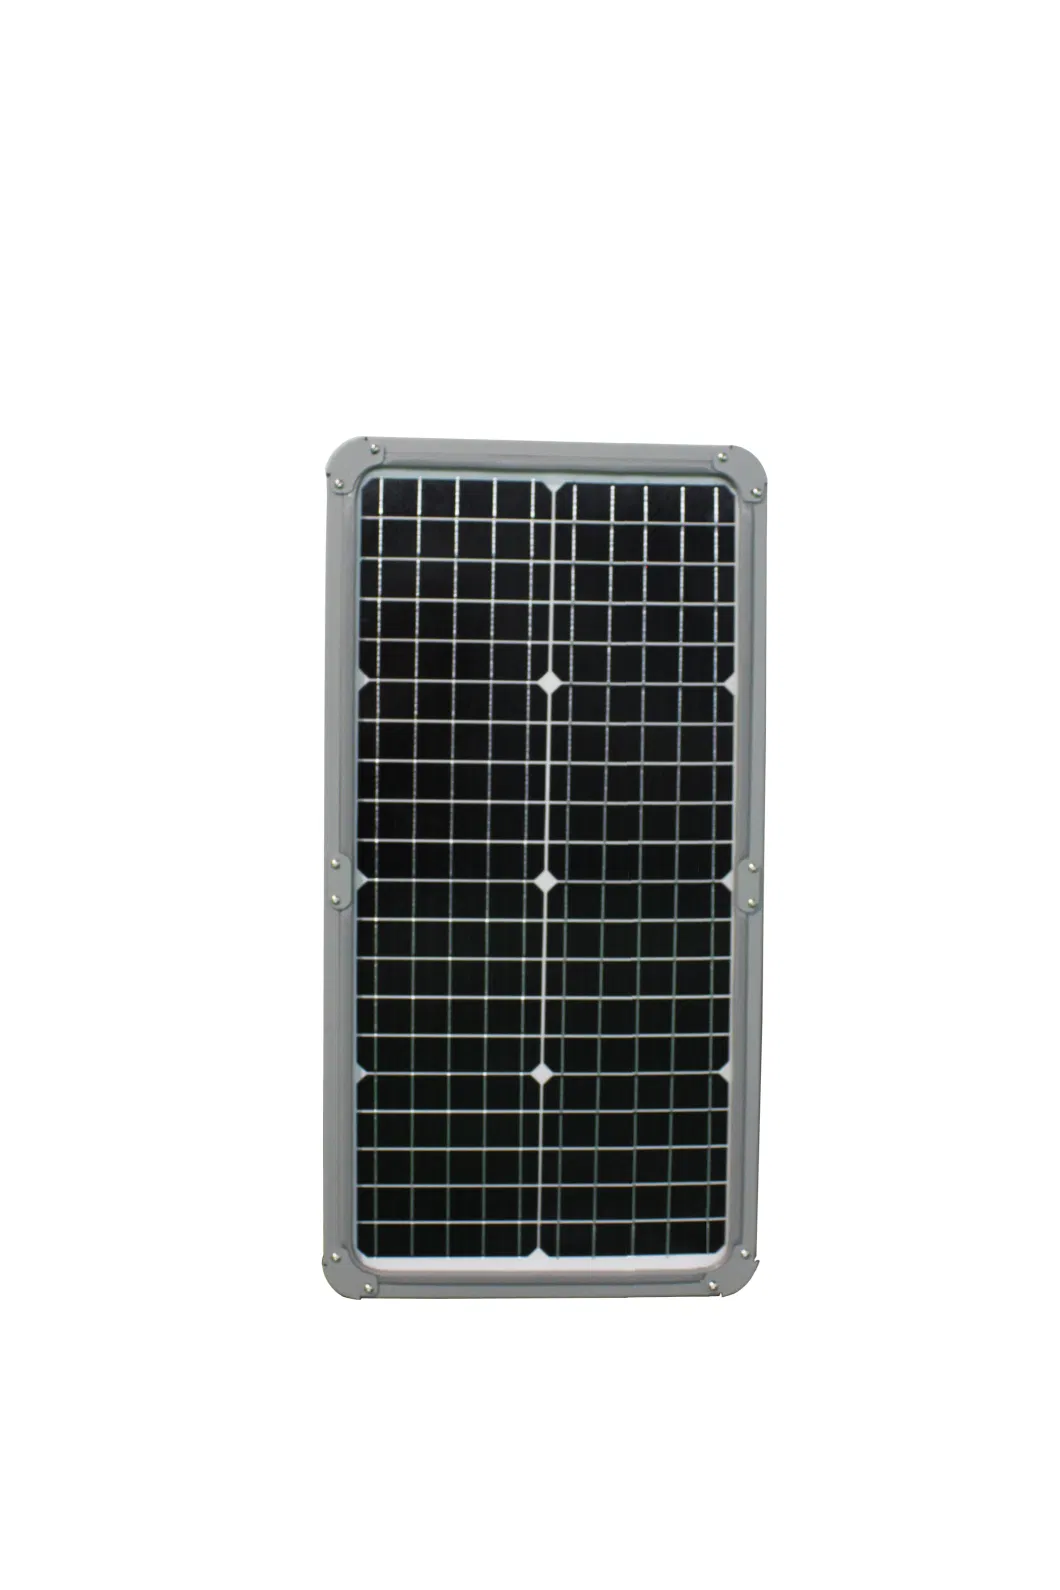 IP68 Waterproof All in One Solar LED Streetlight with CB CE Certification and Lithium Battery Control System for Roads and Garden Solar Powered Outdoor Light